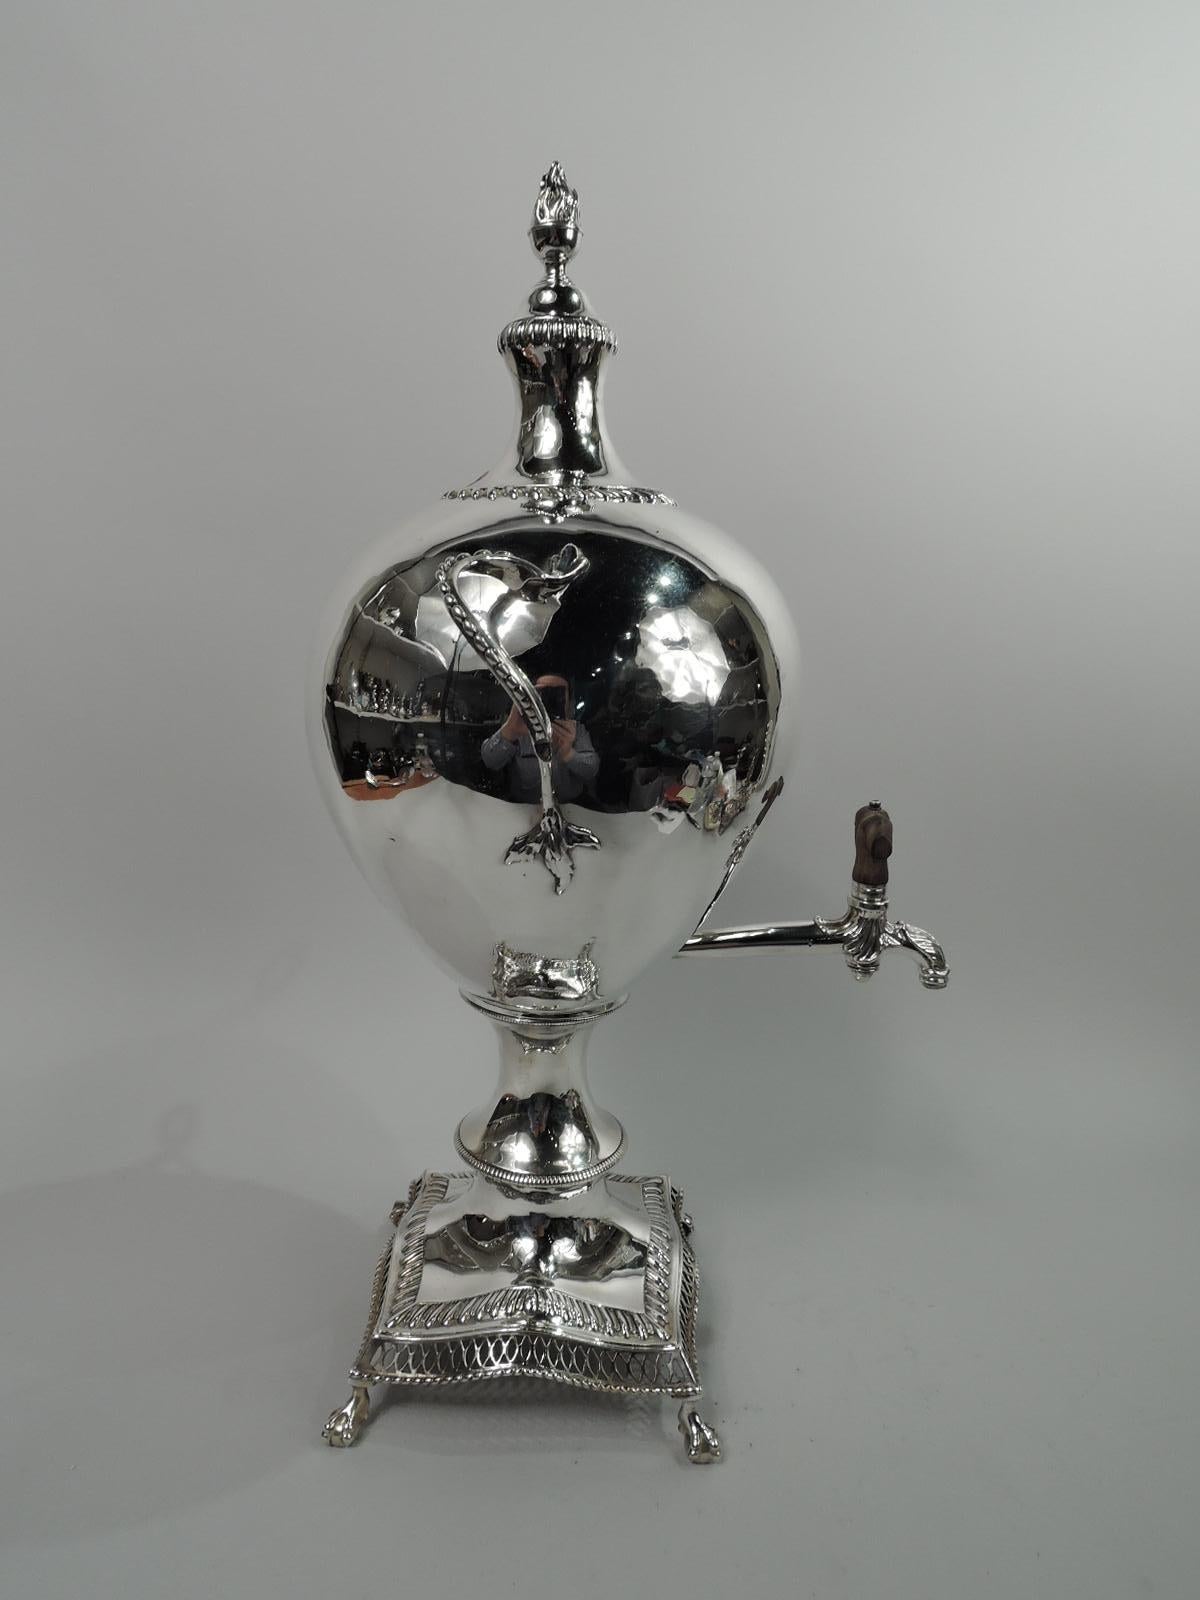 George III sterling silver tea urn. Made by Francis Butty & Nich Dumee in London in 1767. Ovoid bowl with leaf-mounted and beaded twisted side handles. Horizontal leaf-capped spout with leaf-mounted ornamental twist tap in stained wood. Cover domed